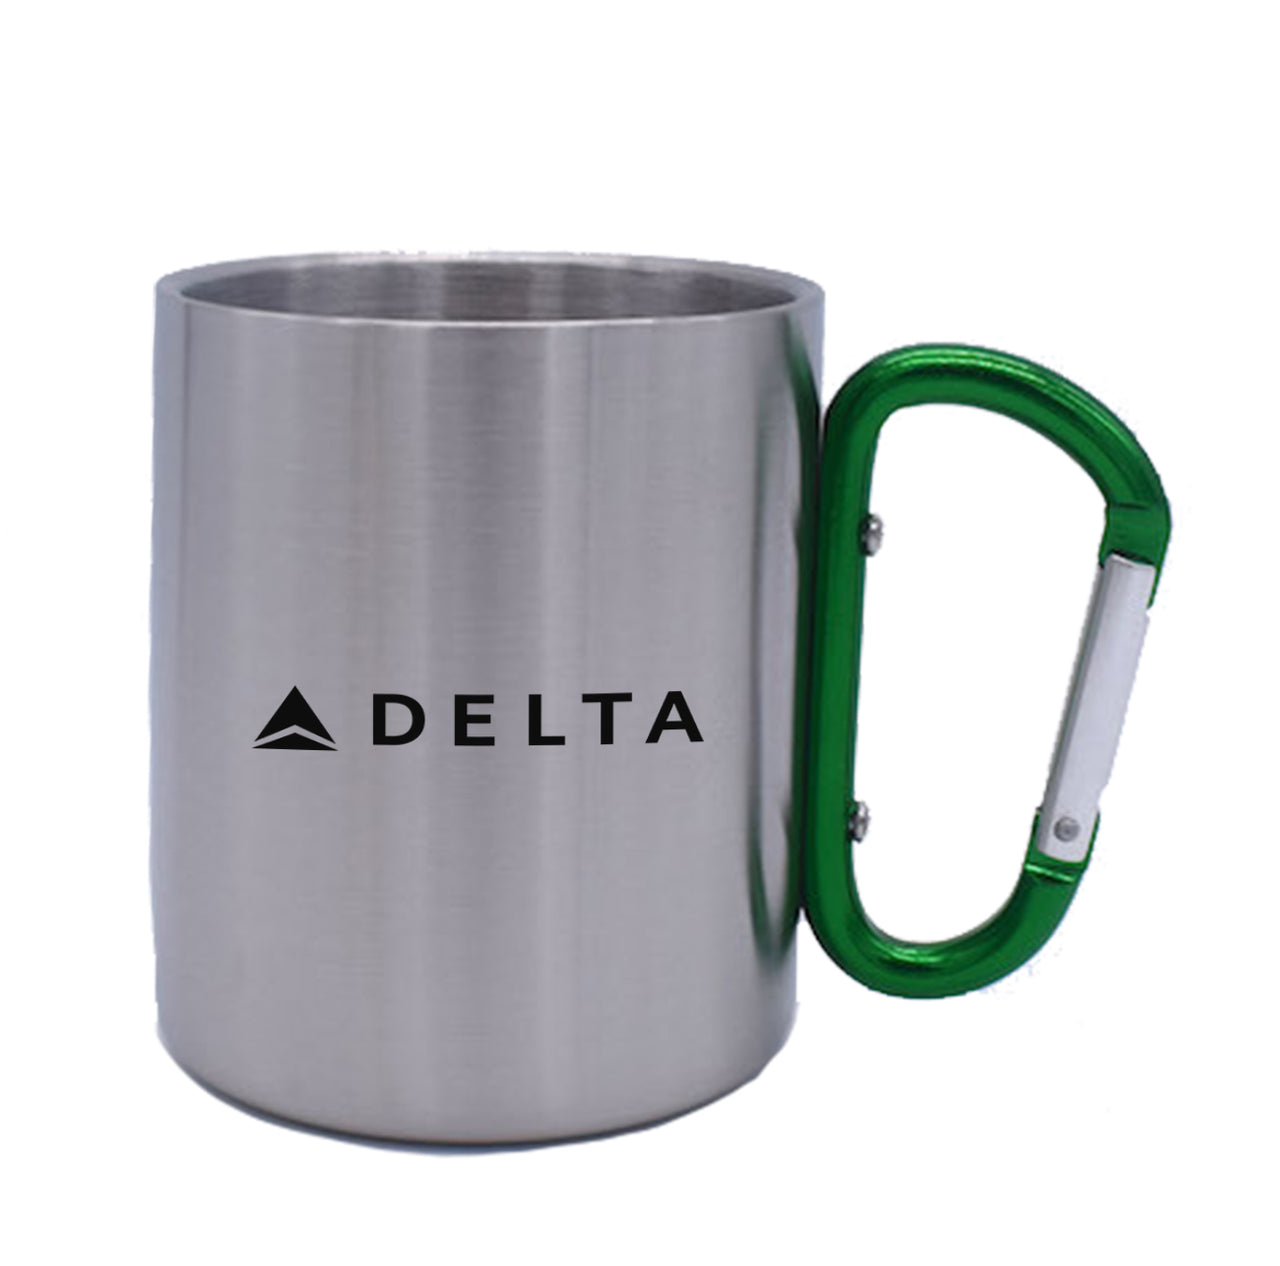 Delta Air Lines Designed Stainless Steel Outdoors Mugs